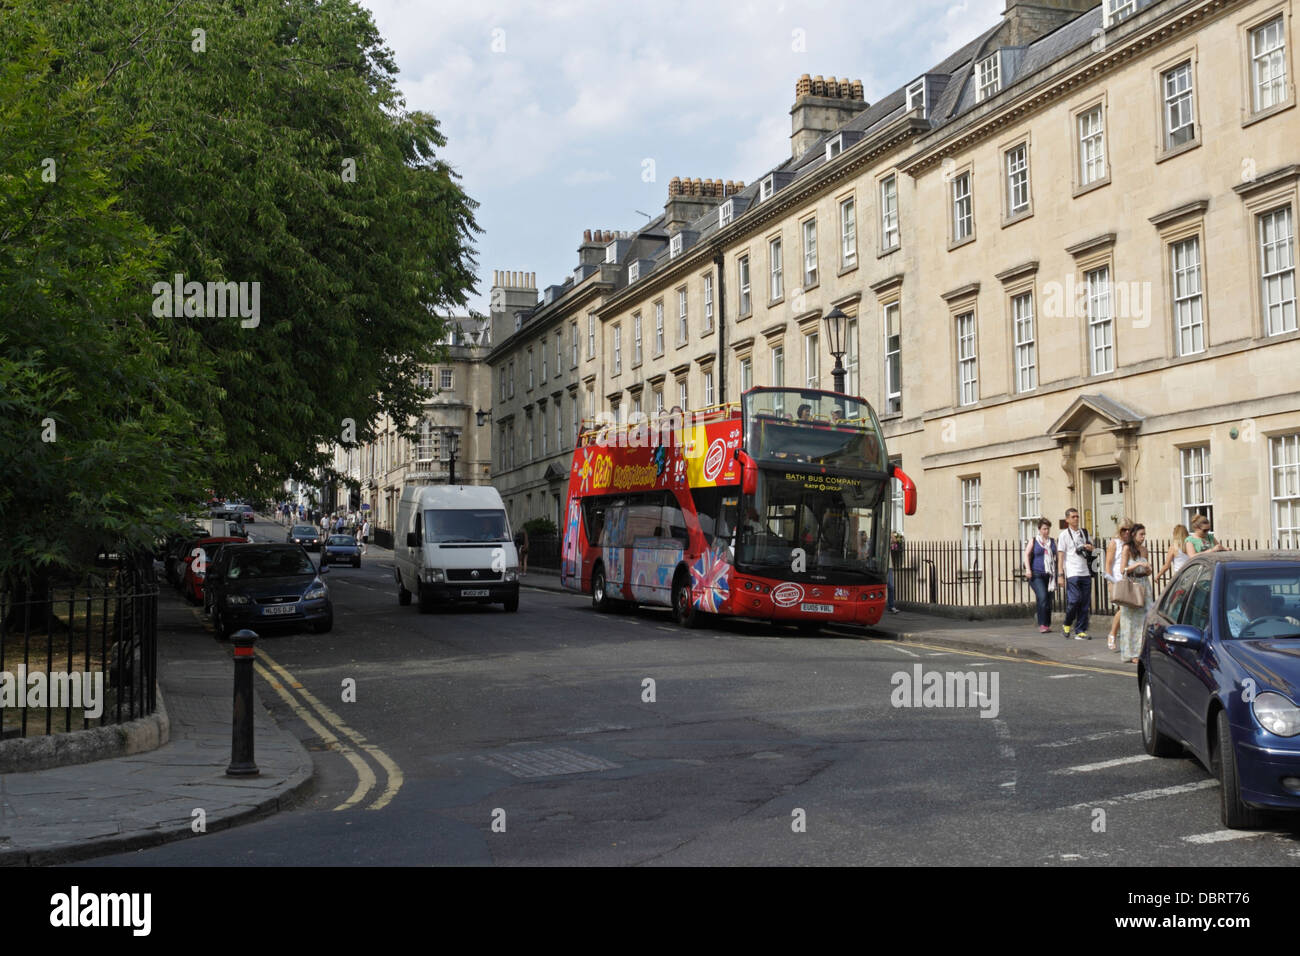 A tourist sightseeing bus in Queens square Bath England UK Stock Photo